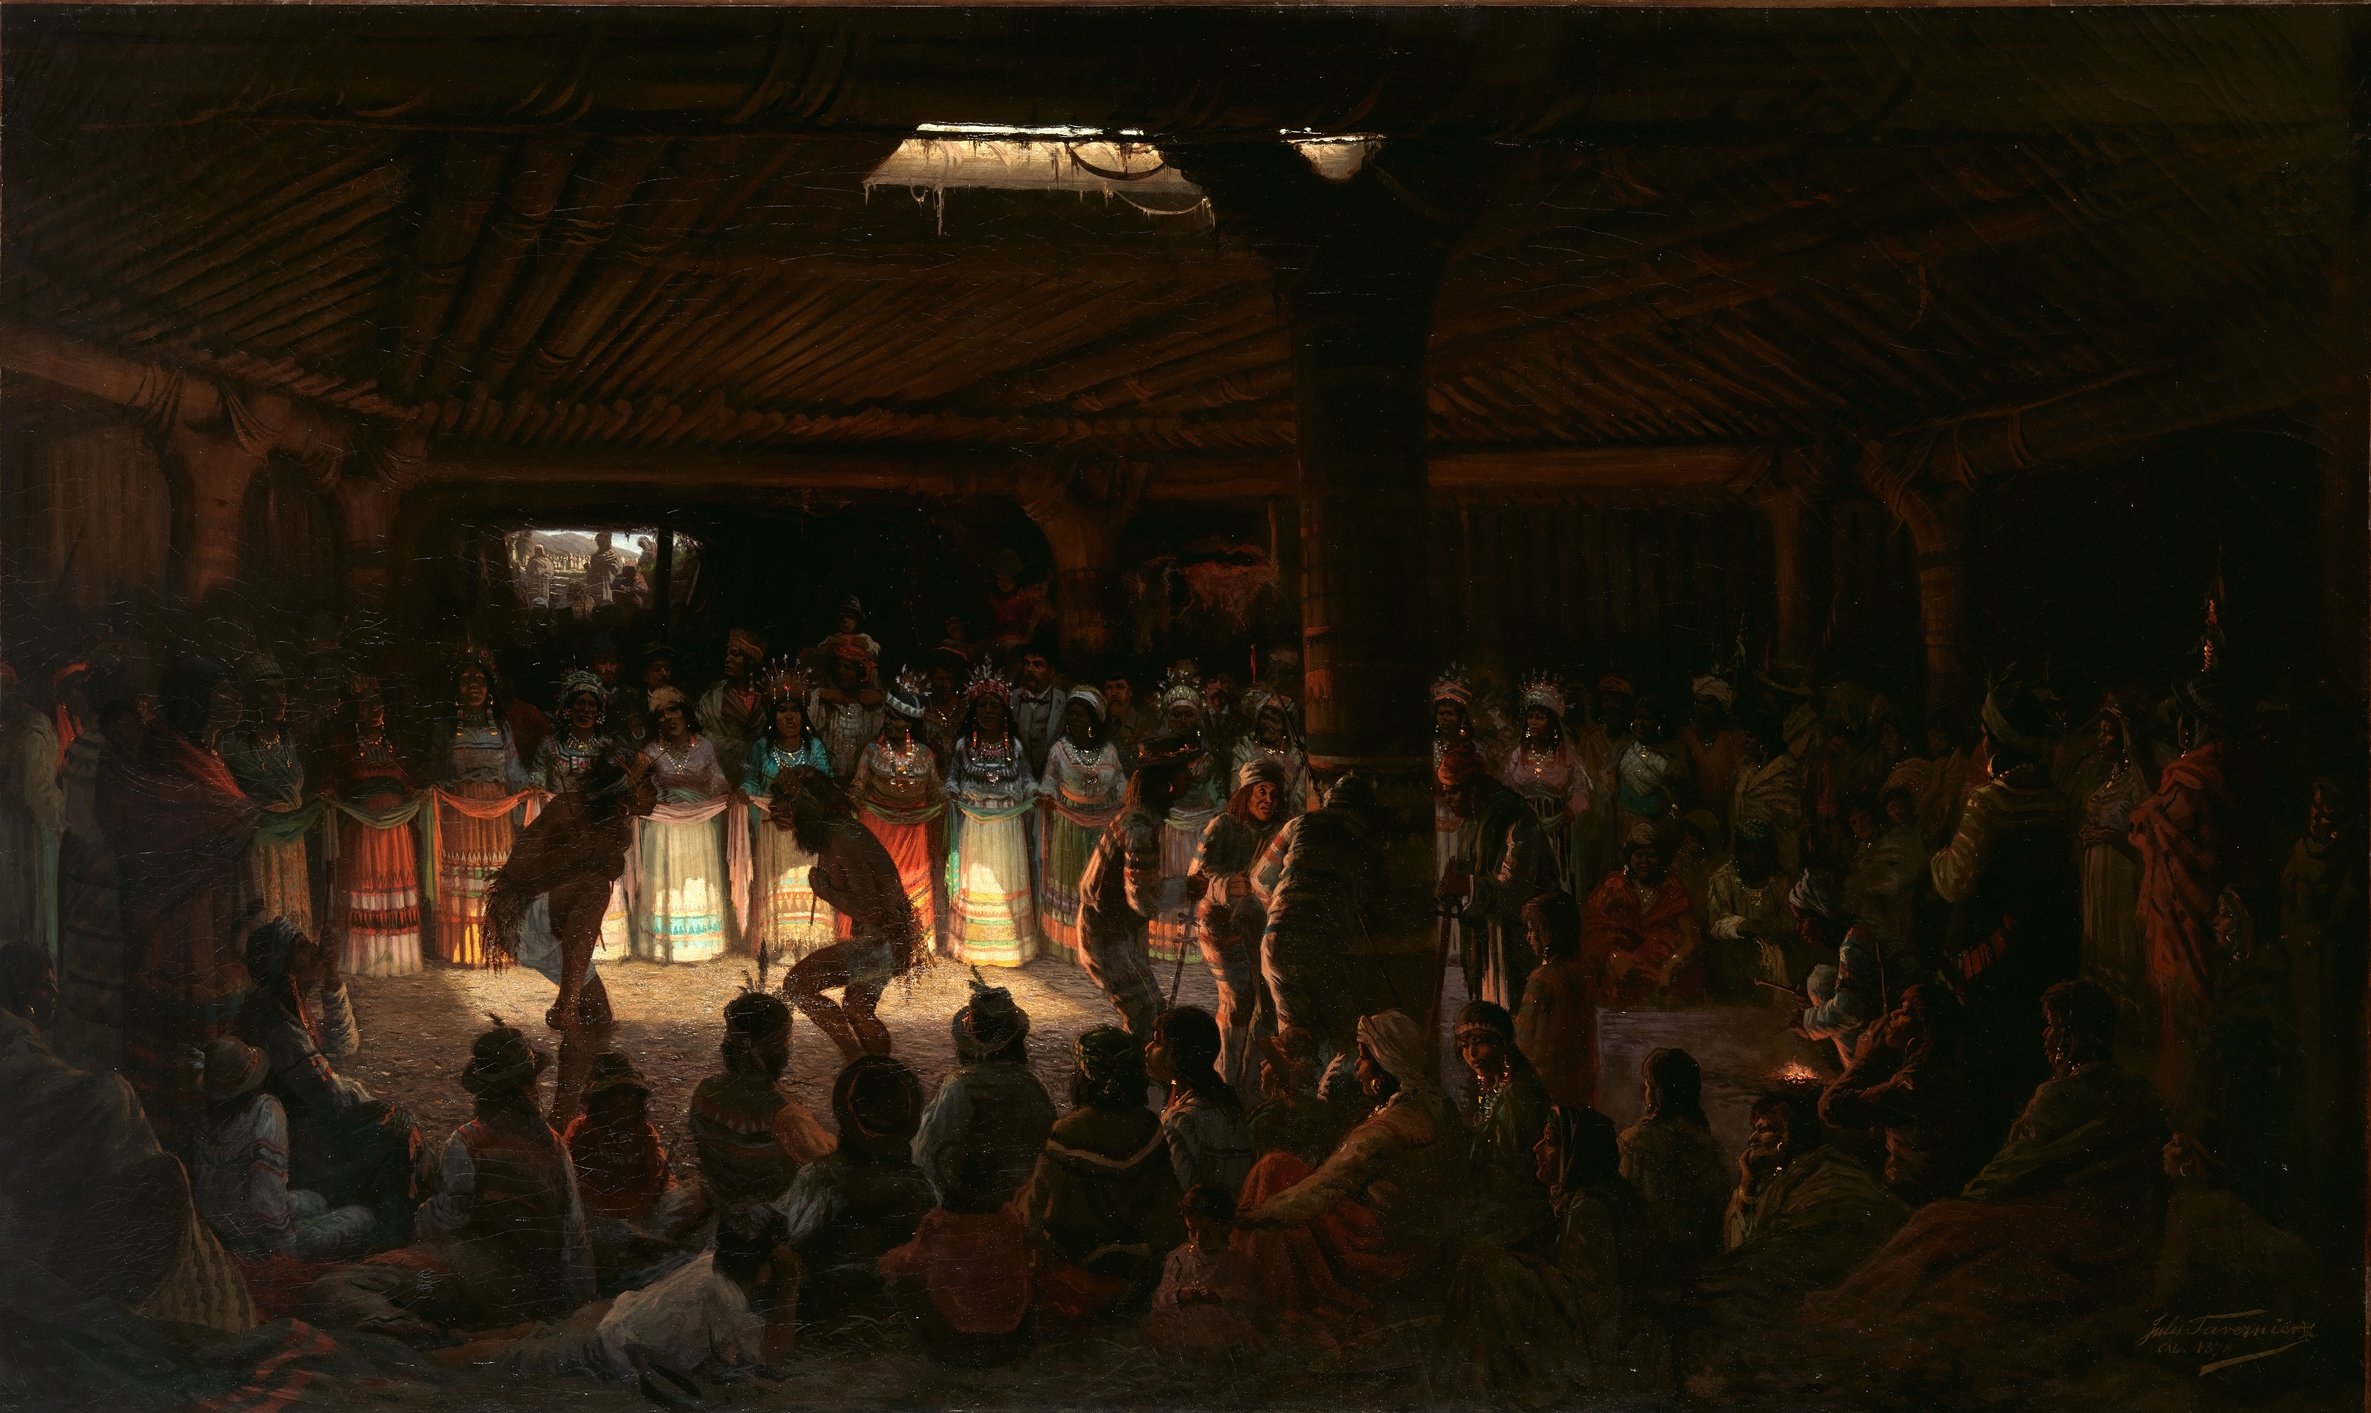 Dance in a Subterranean Roundhouse at Clear Lake, California (1878)